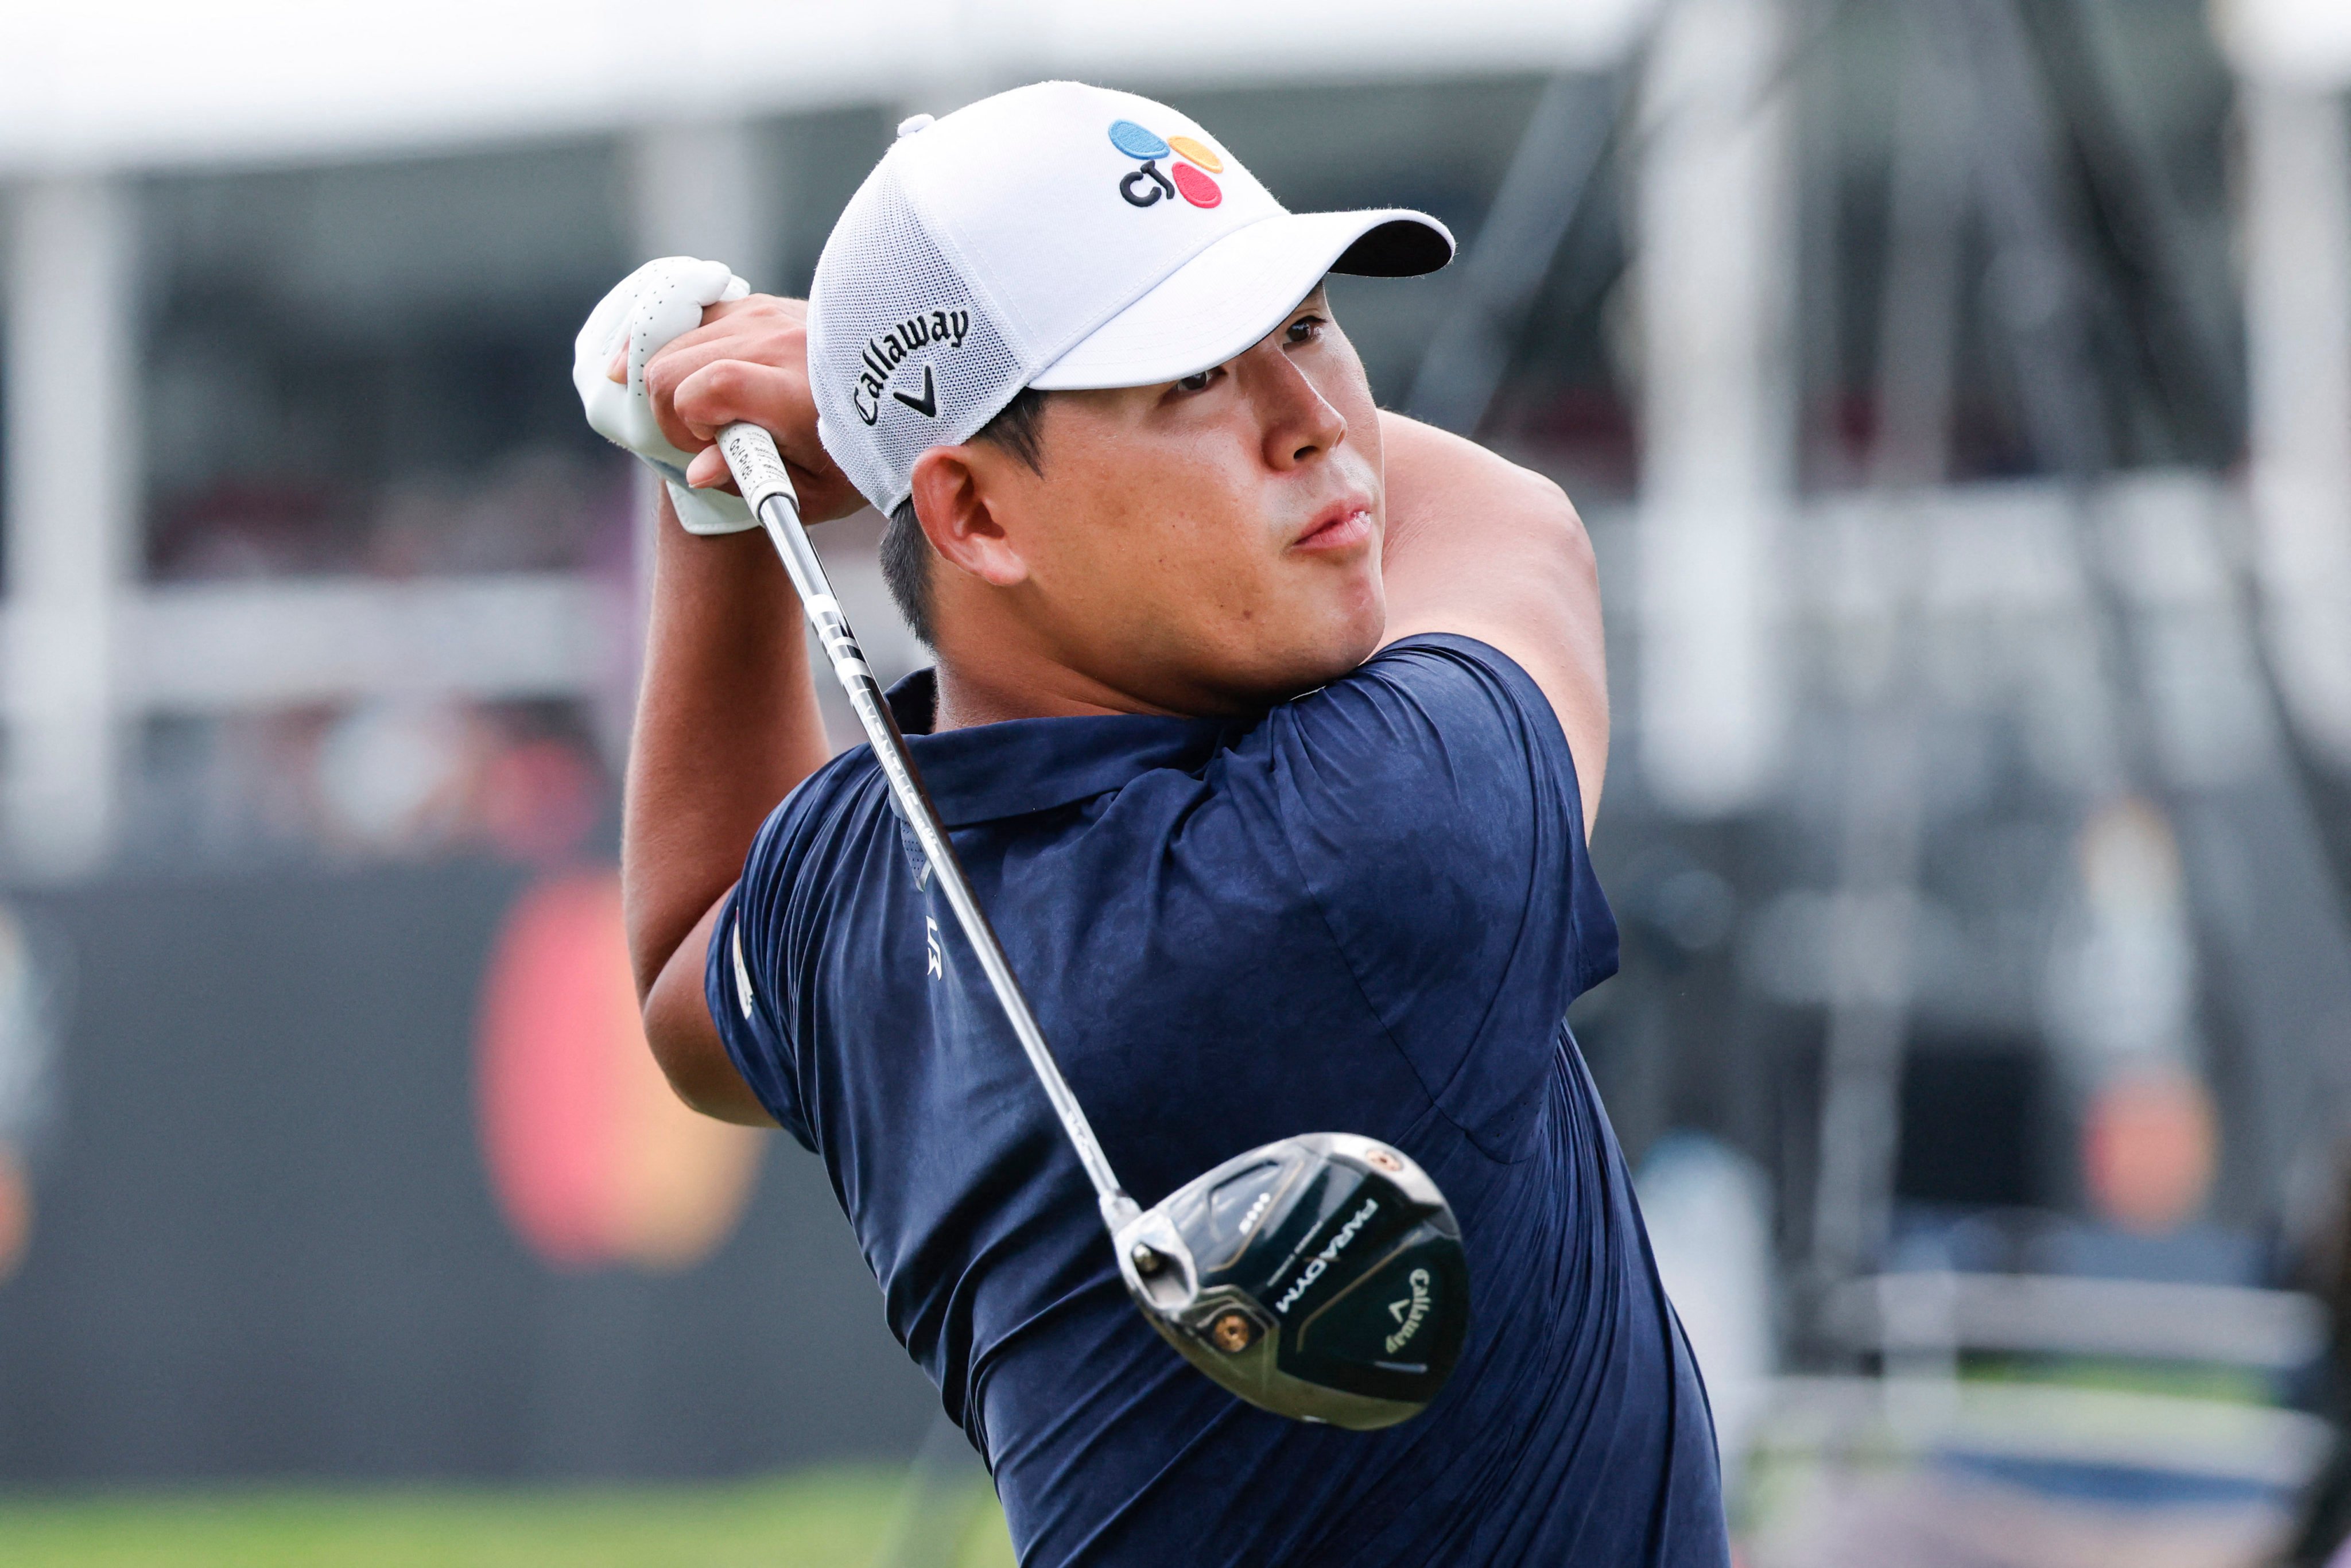 Si Woo Kim hits his drive on the 18th hole during the third round of the Arnold Palmer Invitational golf tournament. Photo: USA TODAY Sports